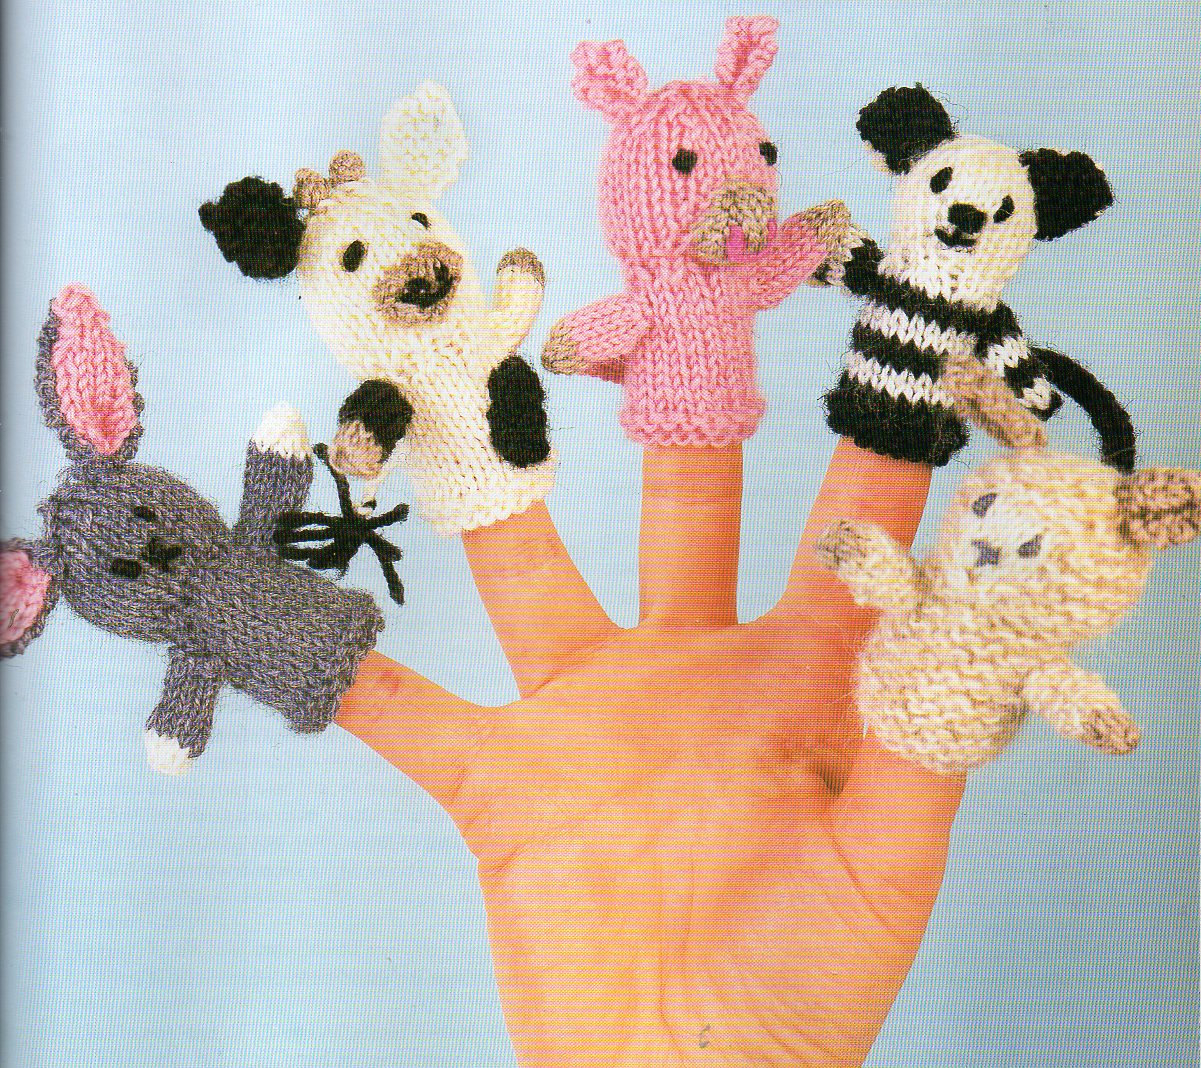 Knitting Patterns For Finger Puppets 5 Farm Animals Finger Puppets Knitting Pattern Ba Child Toddler Toy Rabbit Cow Pig Lamb Mouse Knitting Pattern Pdf Instant Download